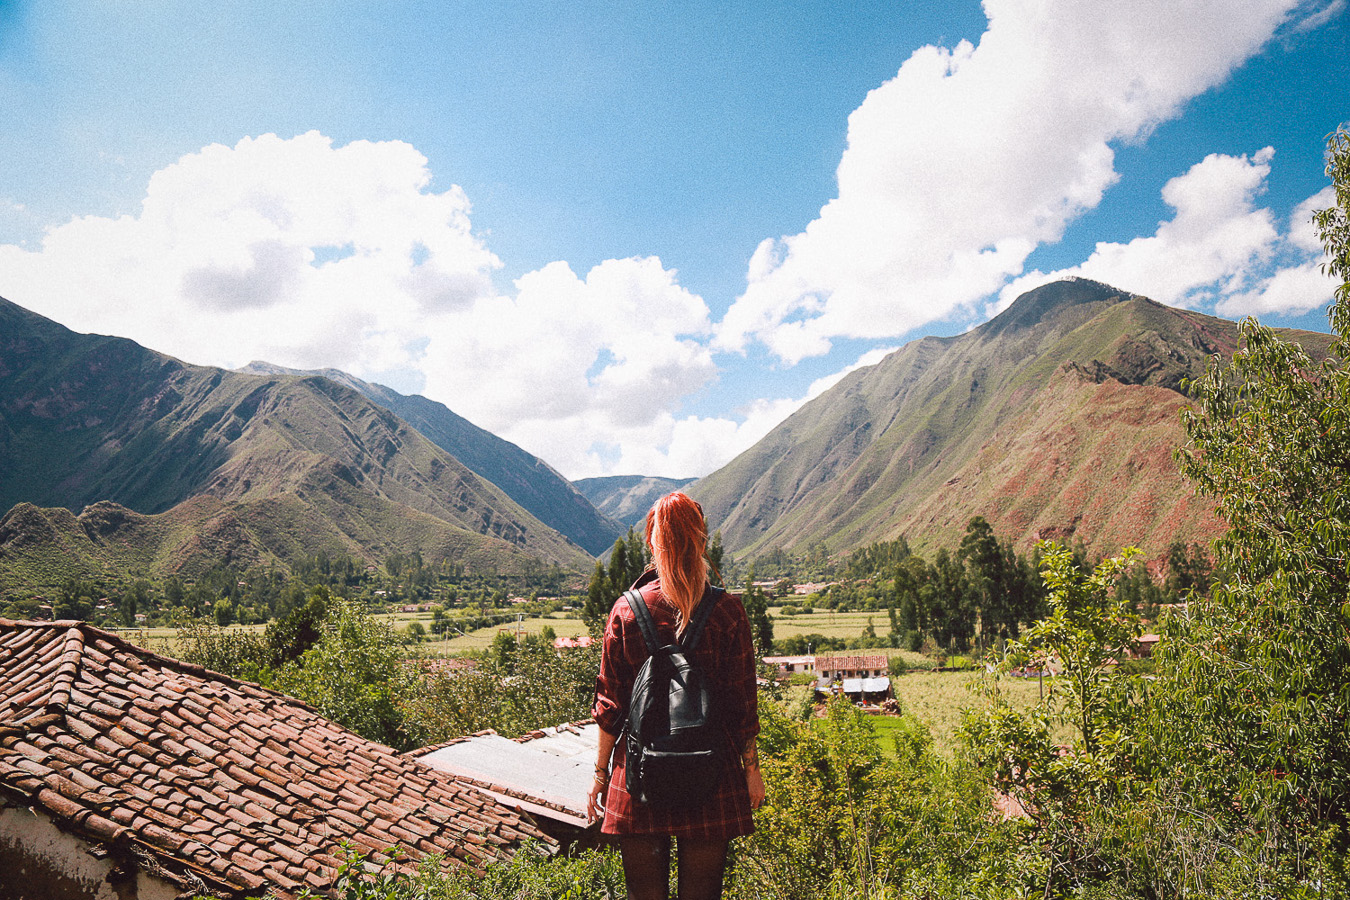 Le Happy wearing ASH leather backpack in Cusco in Peru